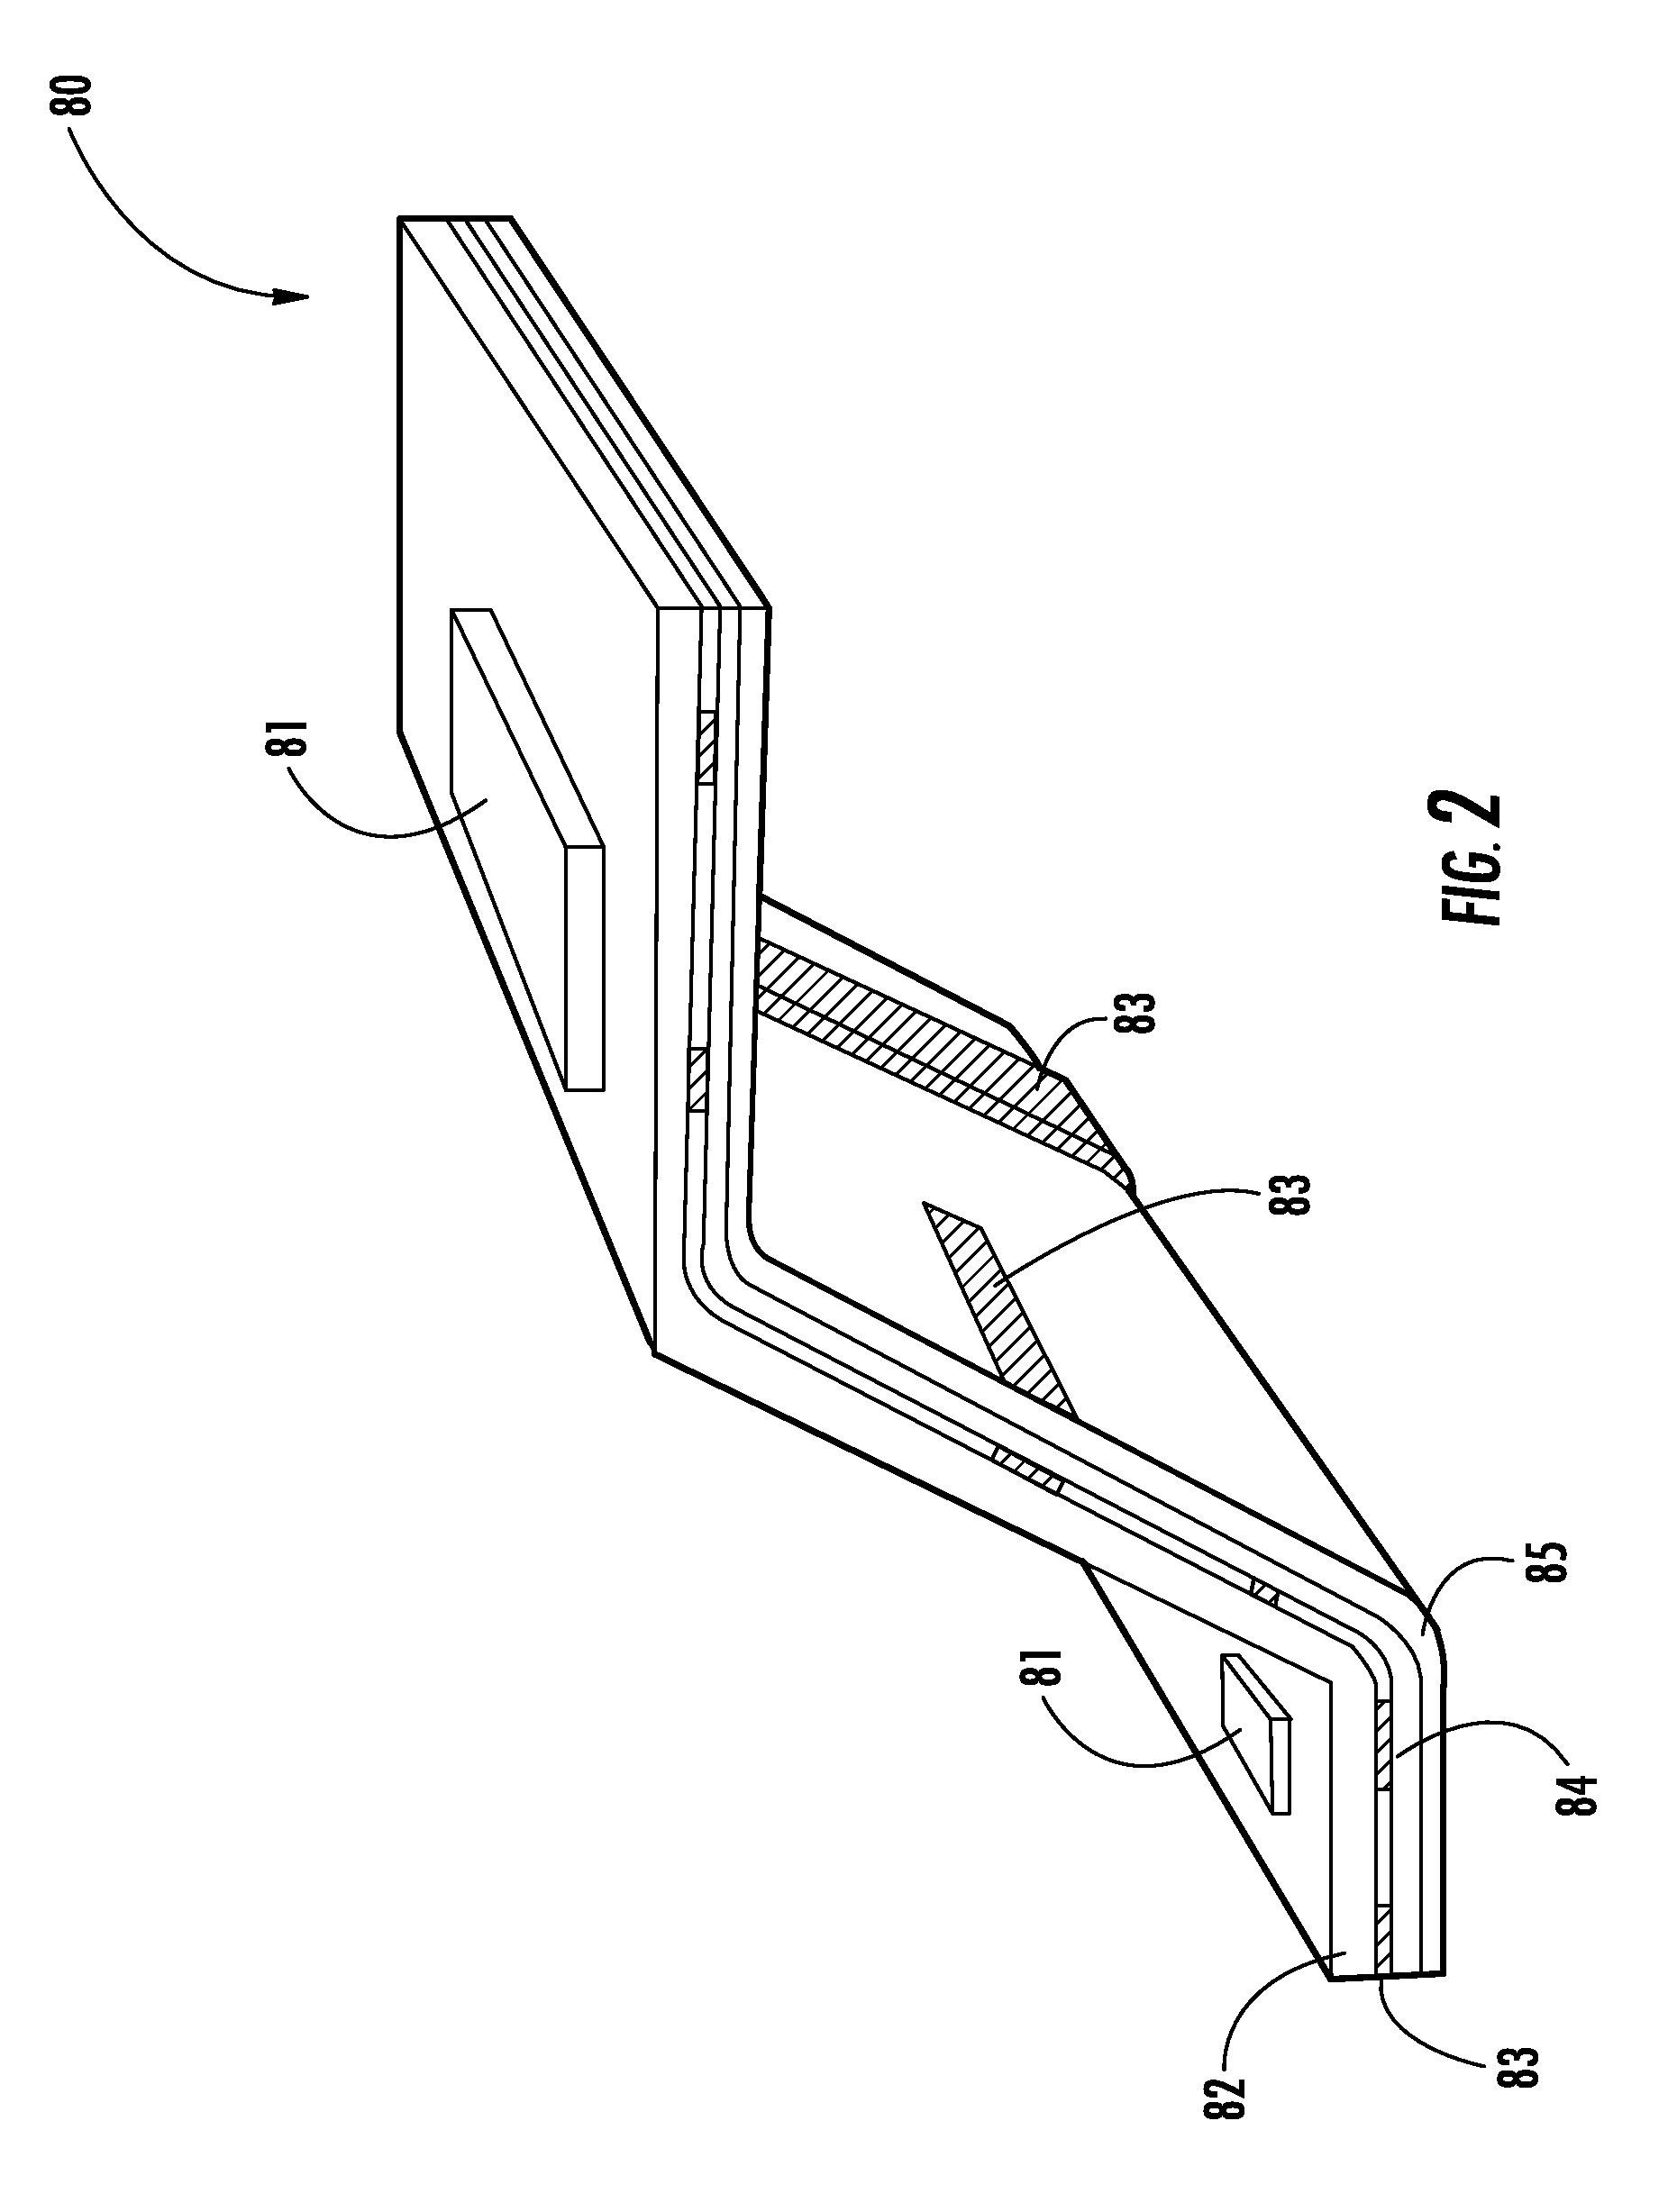 Three-dimensional liquid crystal polymer multilayer circuit board including membrane switch and related methods